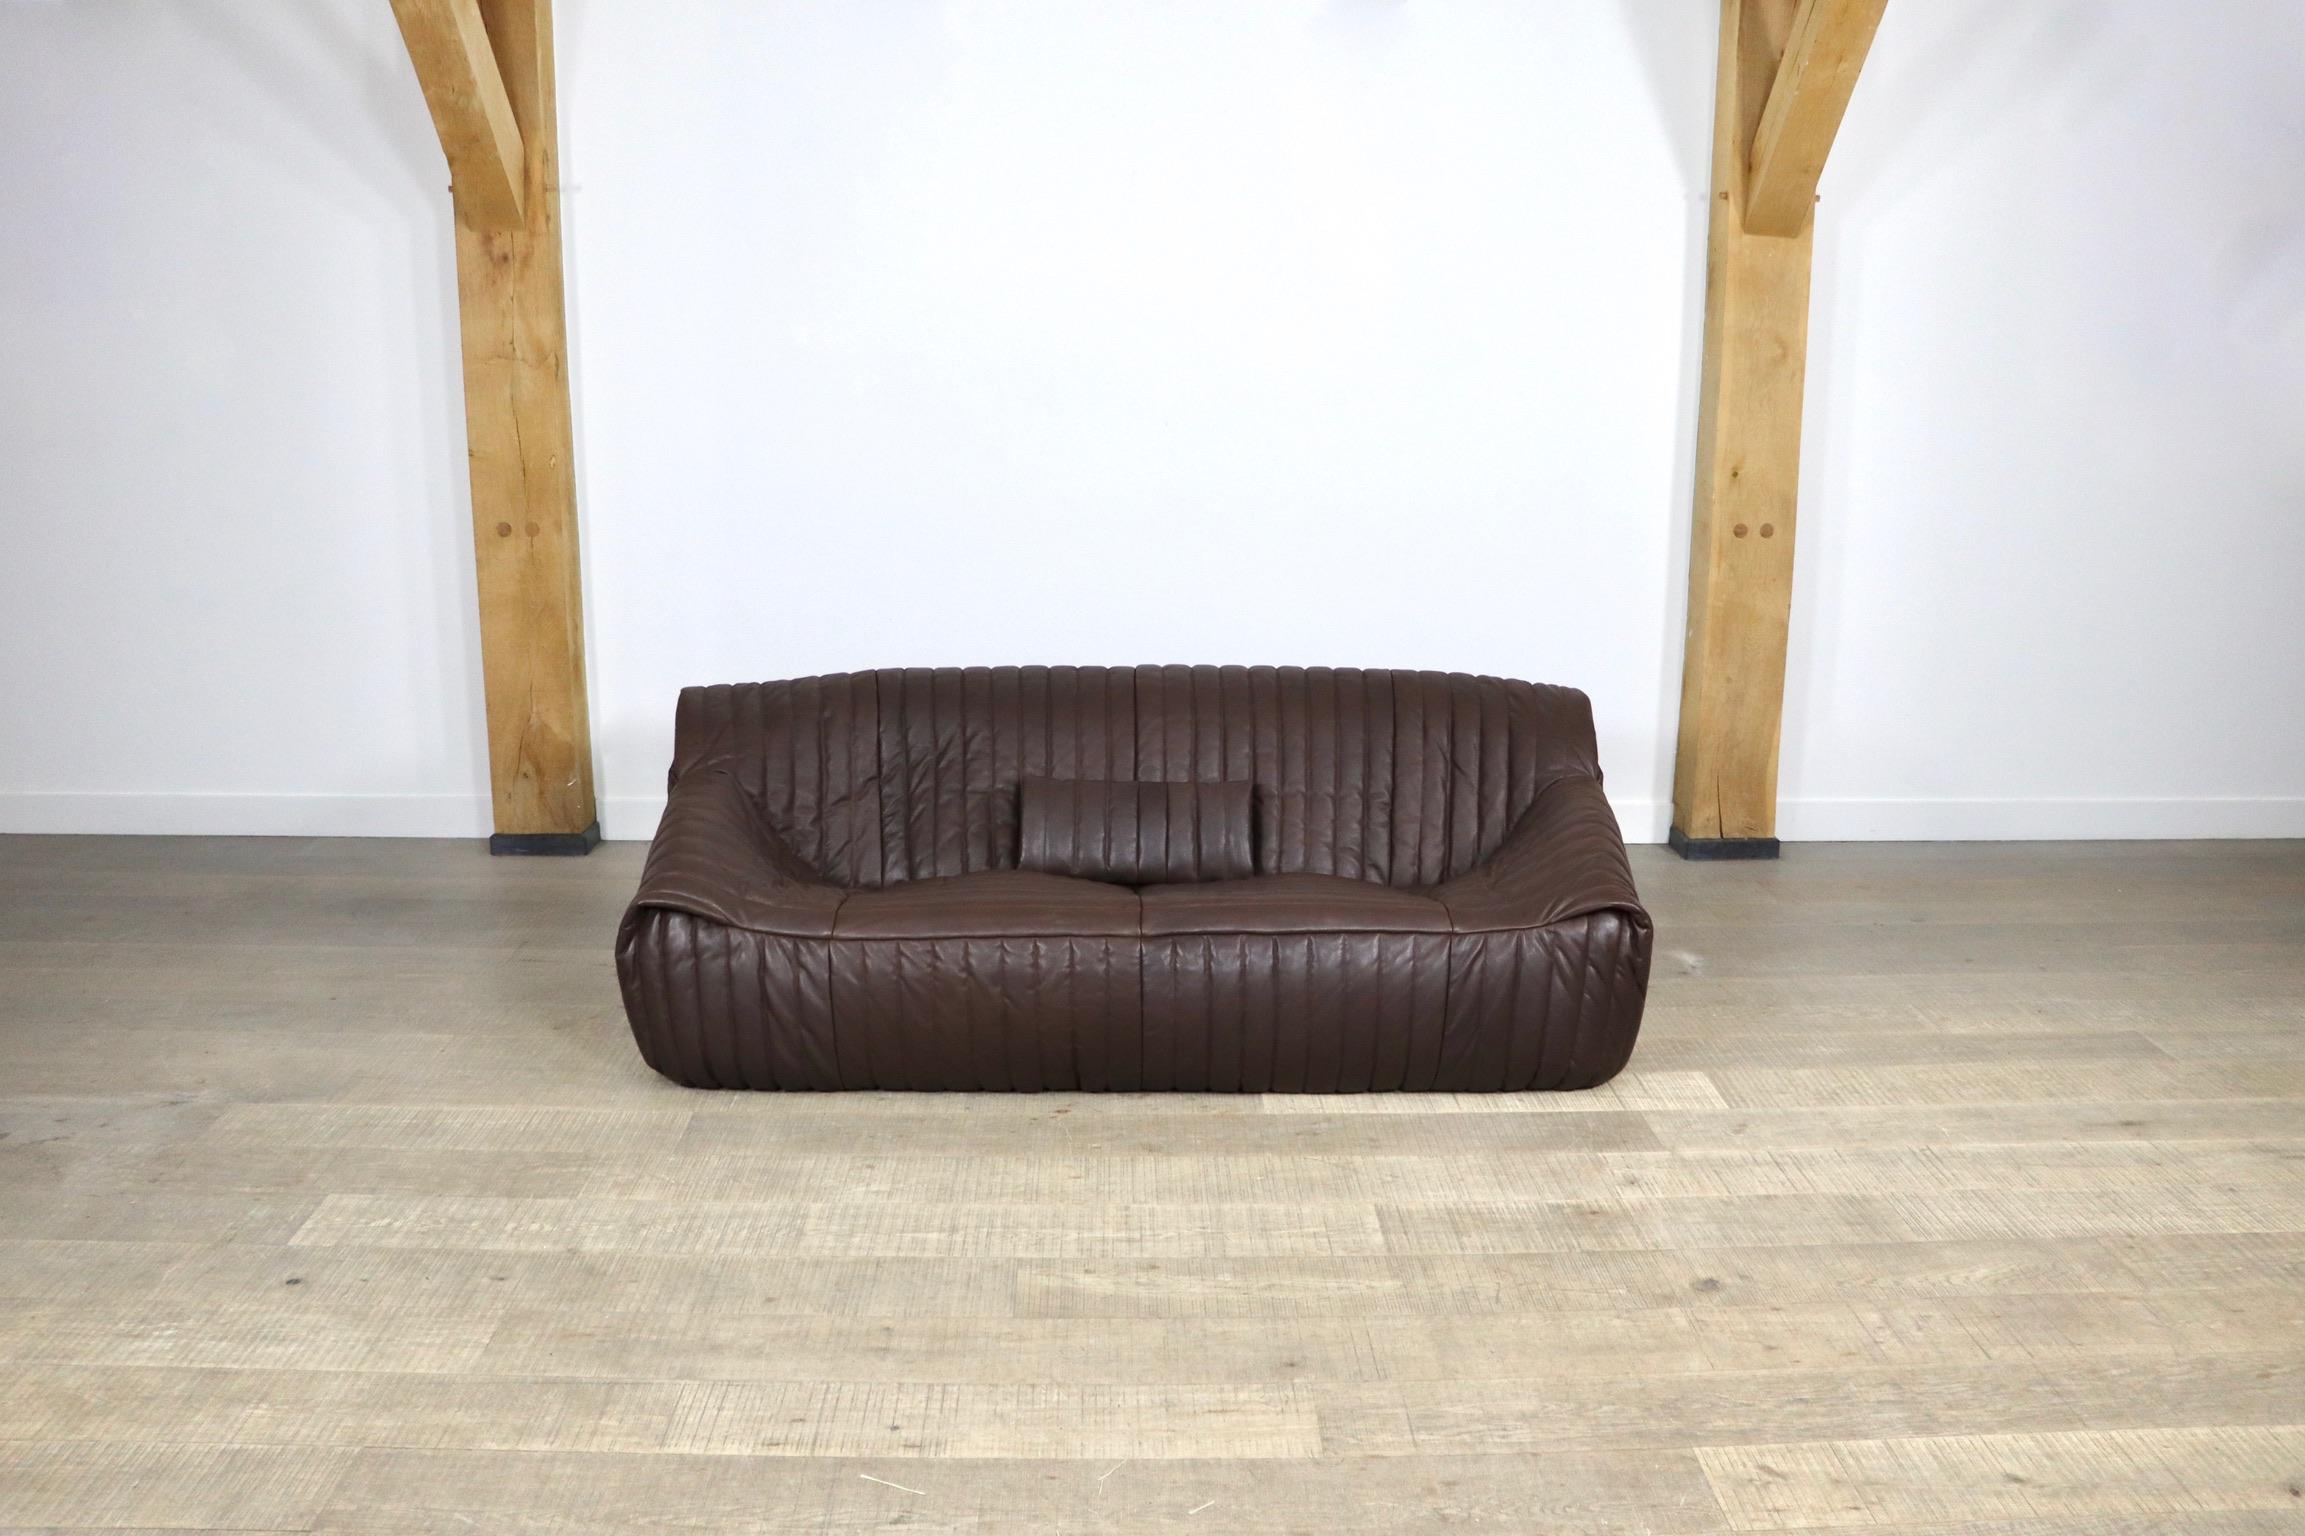 This very comfortable lounge three-seater sofa, model ‘Sandra’ was designed by Annie Hieronimus for Cinna in 1977 in France. The stunning high quality brown leather upholstery gives this sofa a luxurious feeling. The sofa has been produced in the